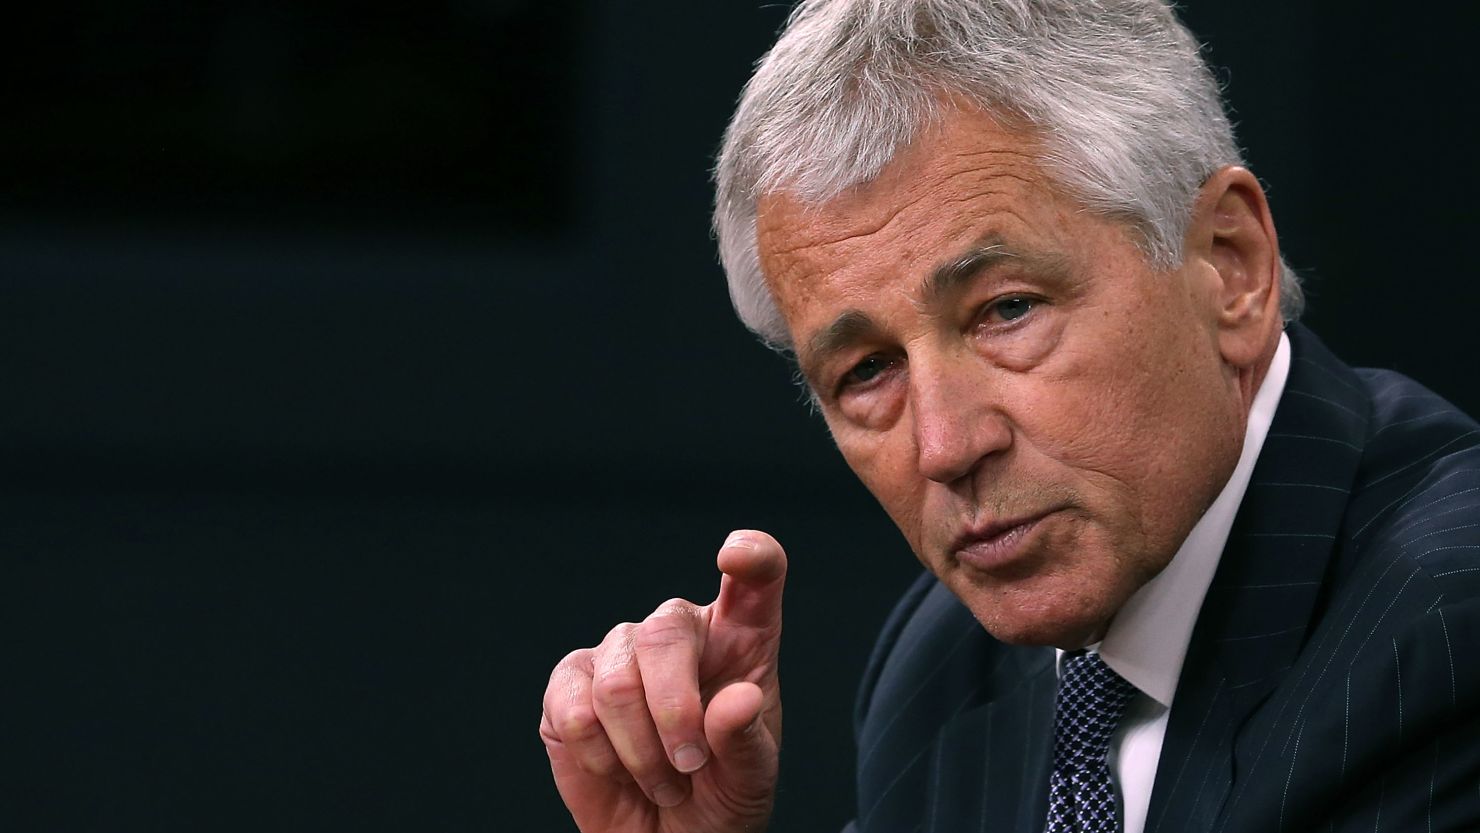 Secretary of Defense Chuck Hagel will trim his office budget by 20%, the same as the Pentagon's top brass.